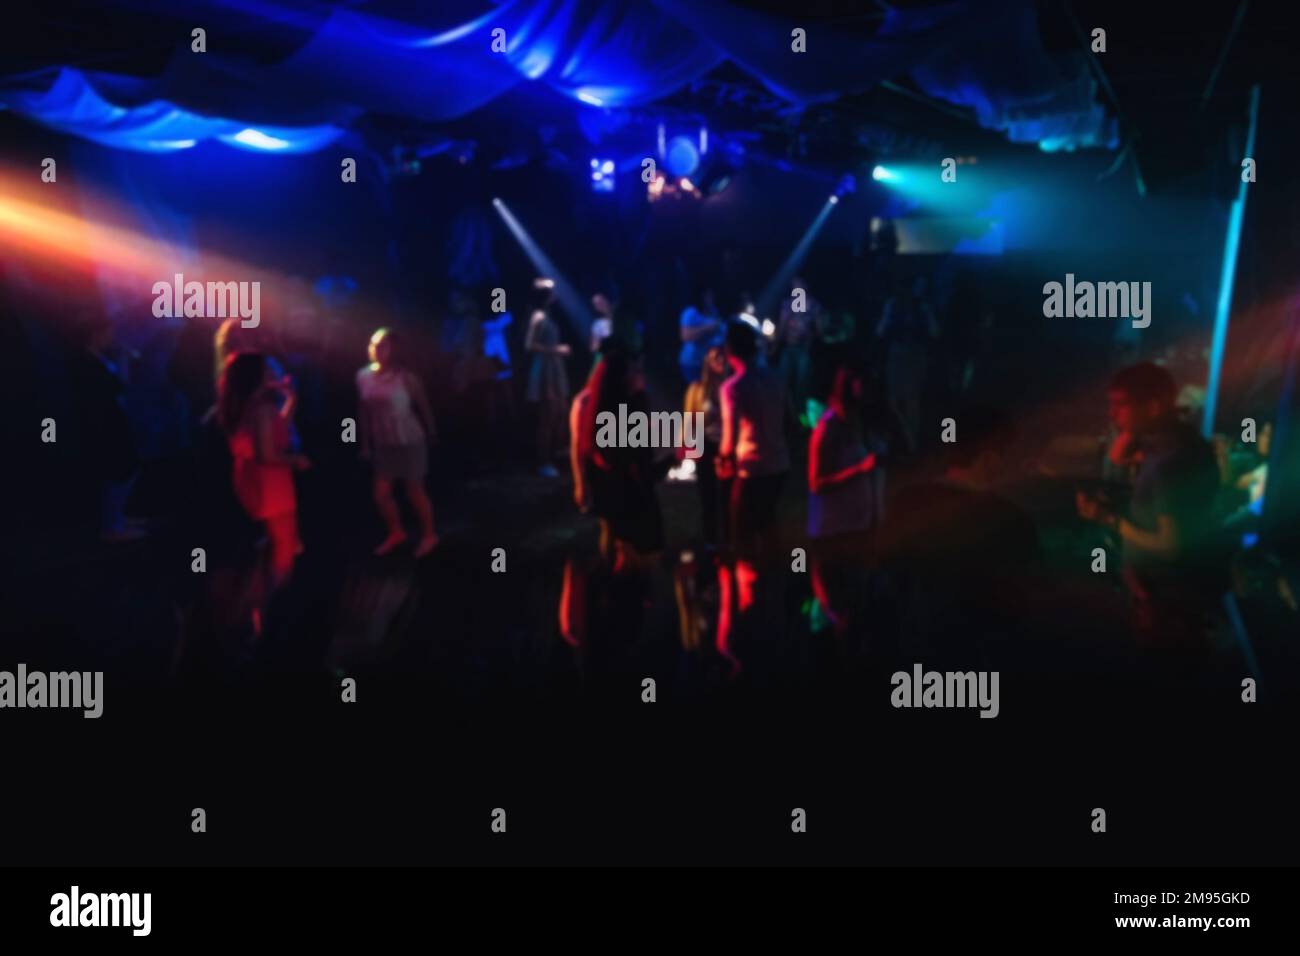 blurred people dancing on the dance floor in a nightclub on the dance floor with colorful background Stock Photo